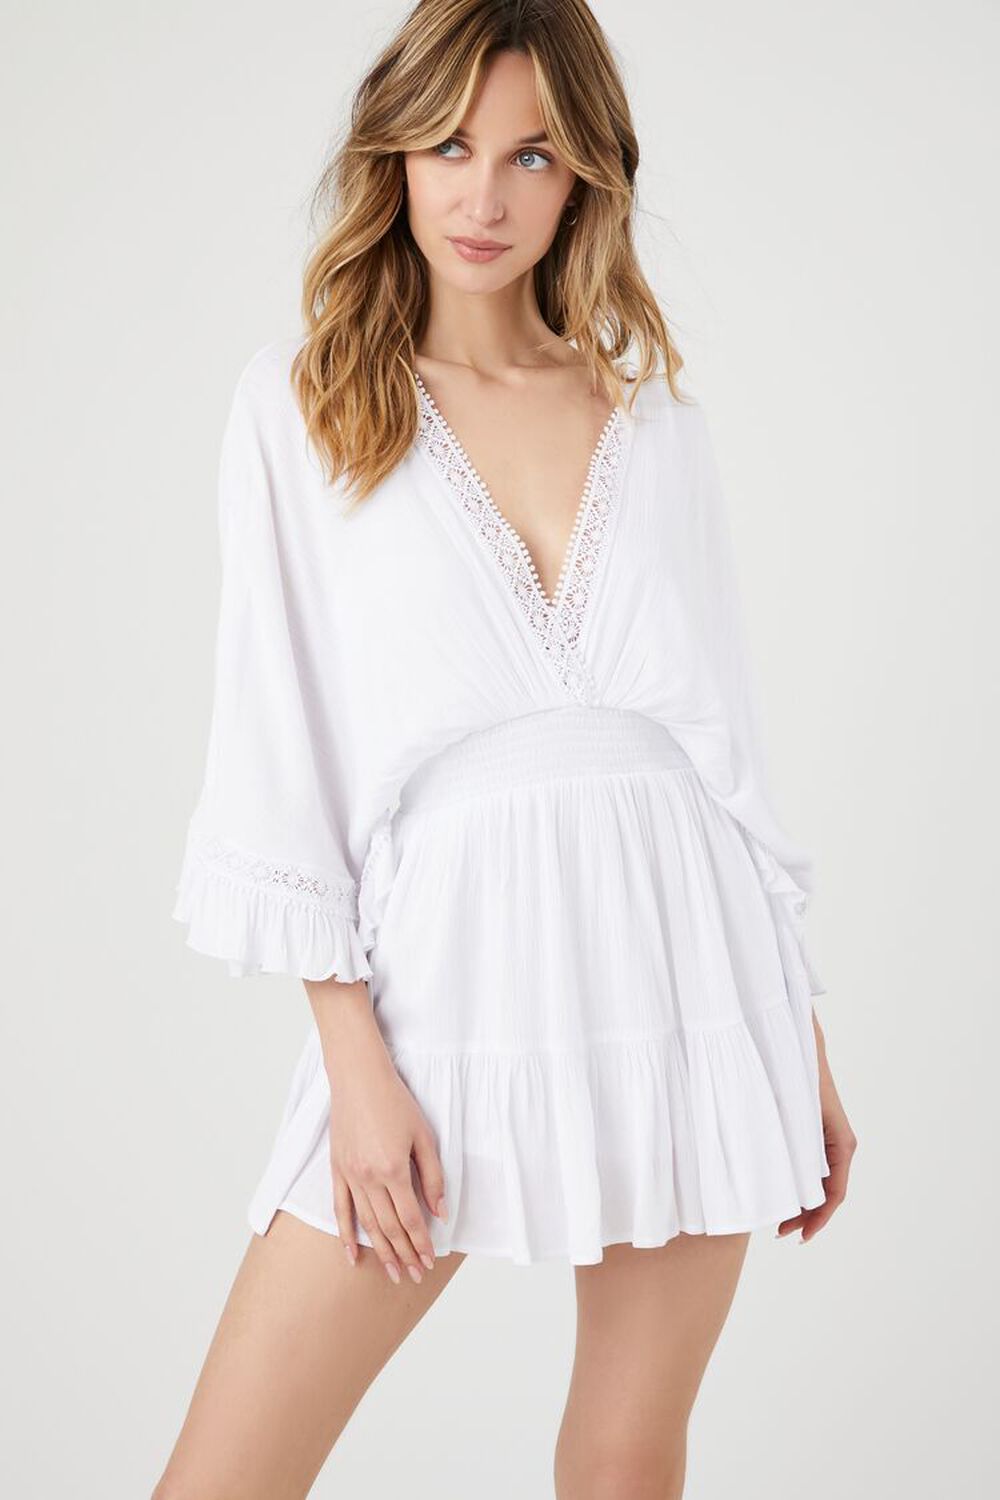 WHITE Crepe Butterfly-Sleeve Mini Dress, image 1